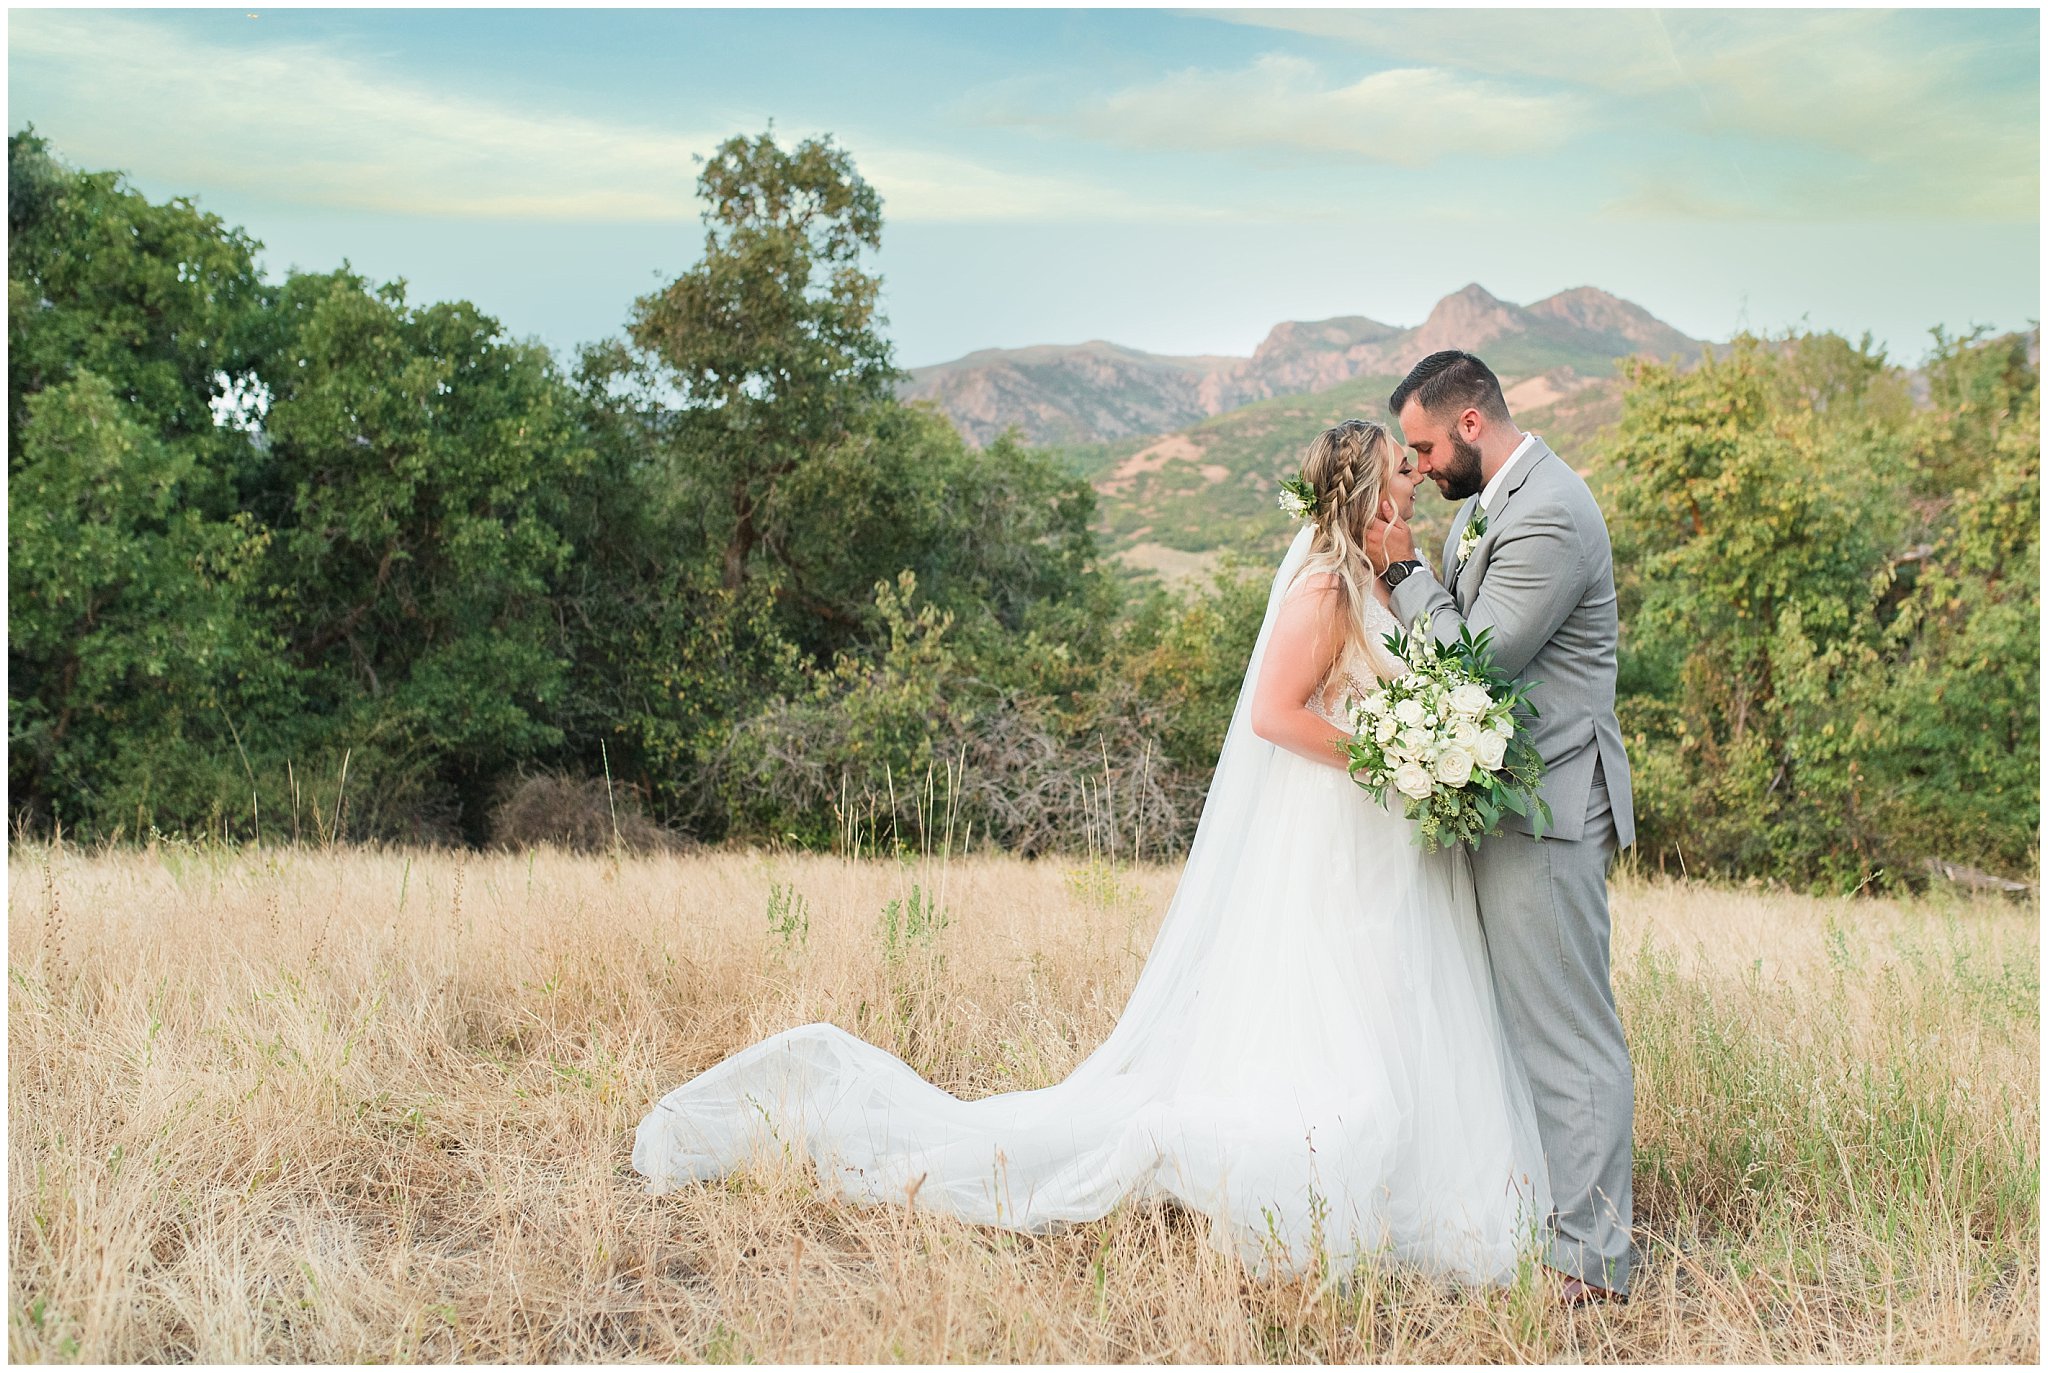 Bride and groom portraits with gray suit and champagne dress and veil and white floral bouquet in the Utah mountains | Sage Green and Gray Summer Wedding at Oak Hills | Jessie and Dallin Photography